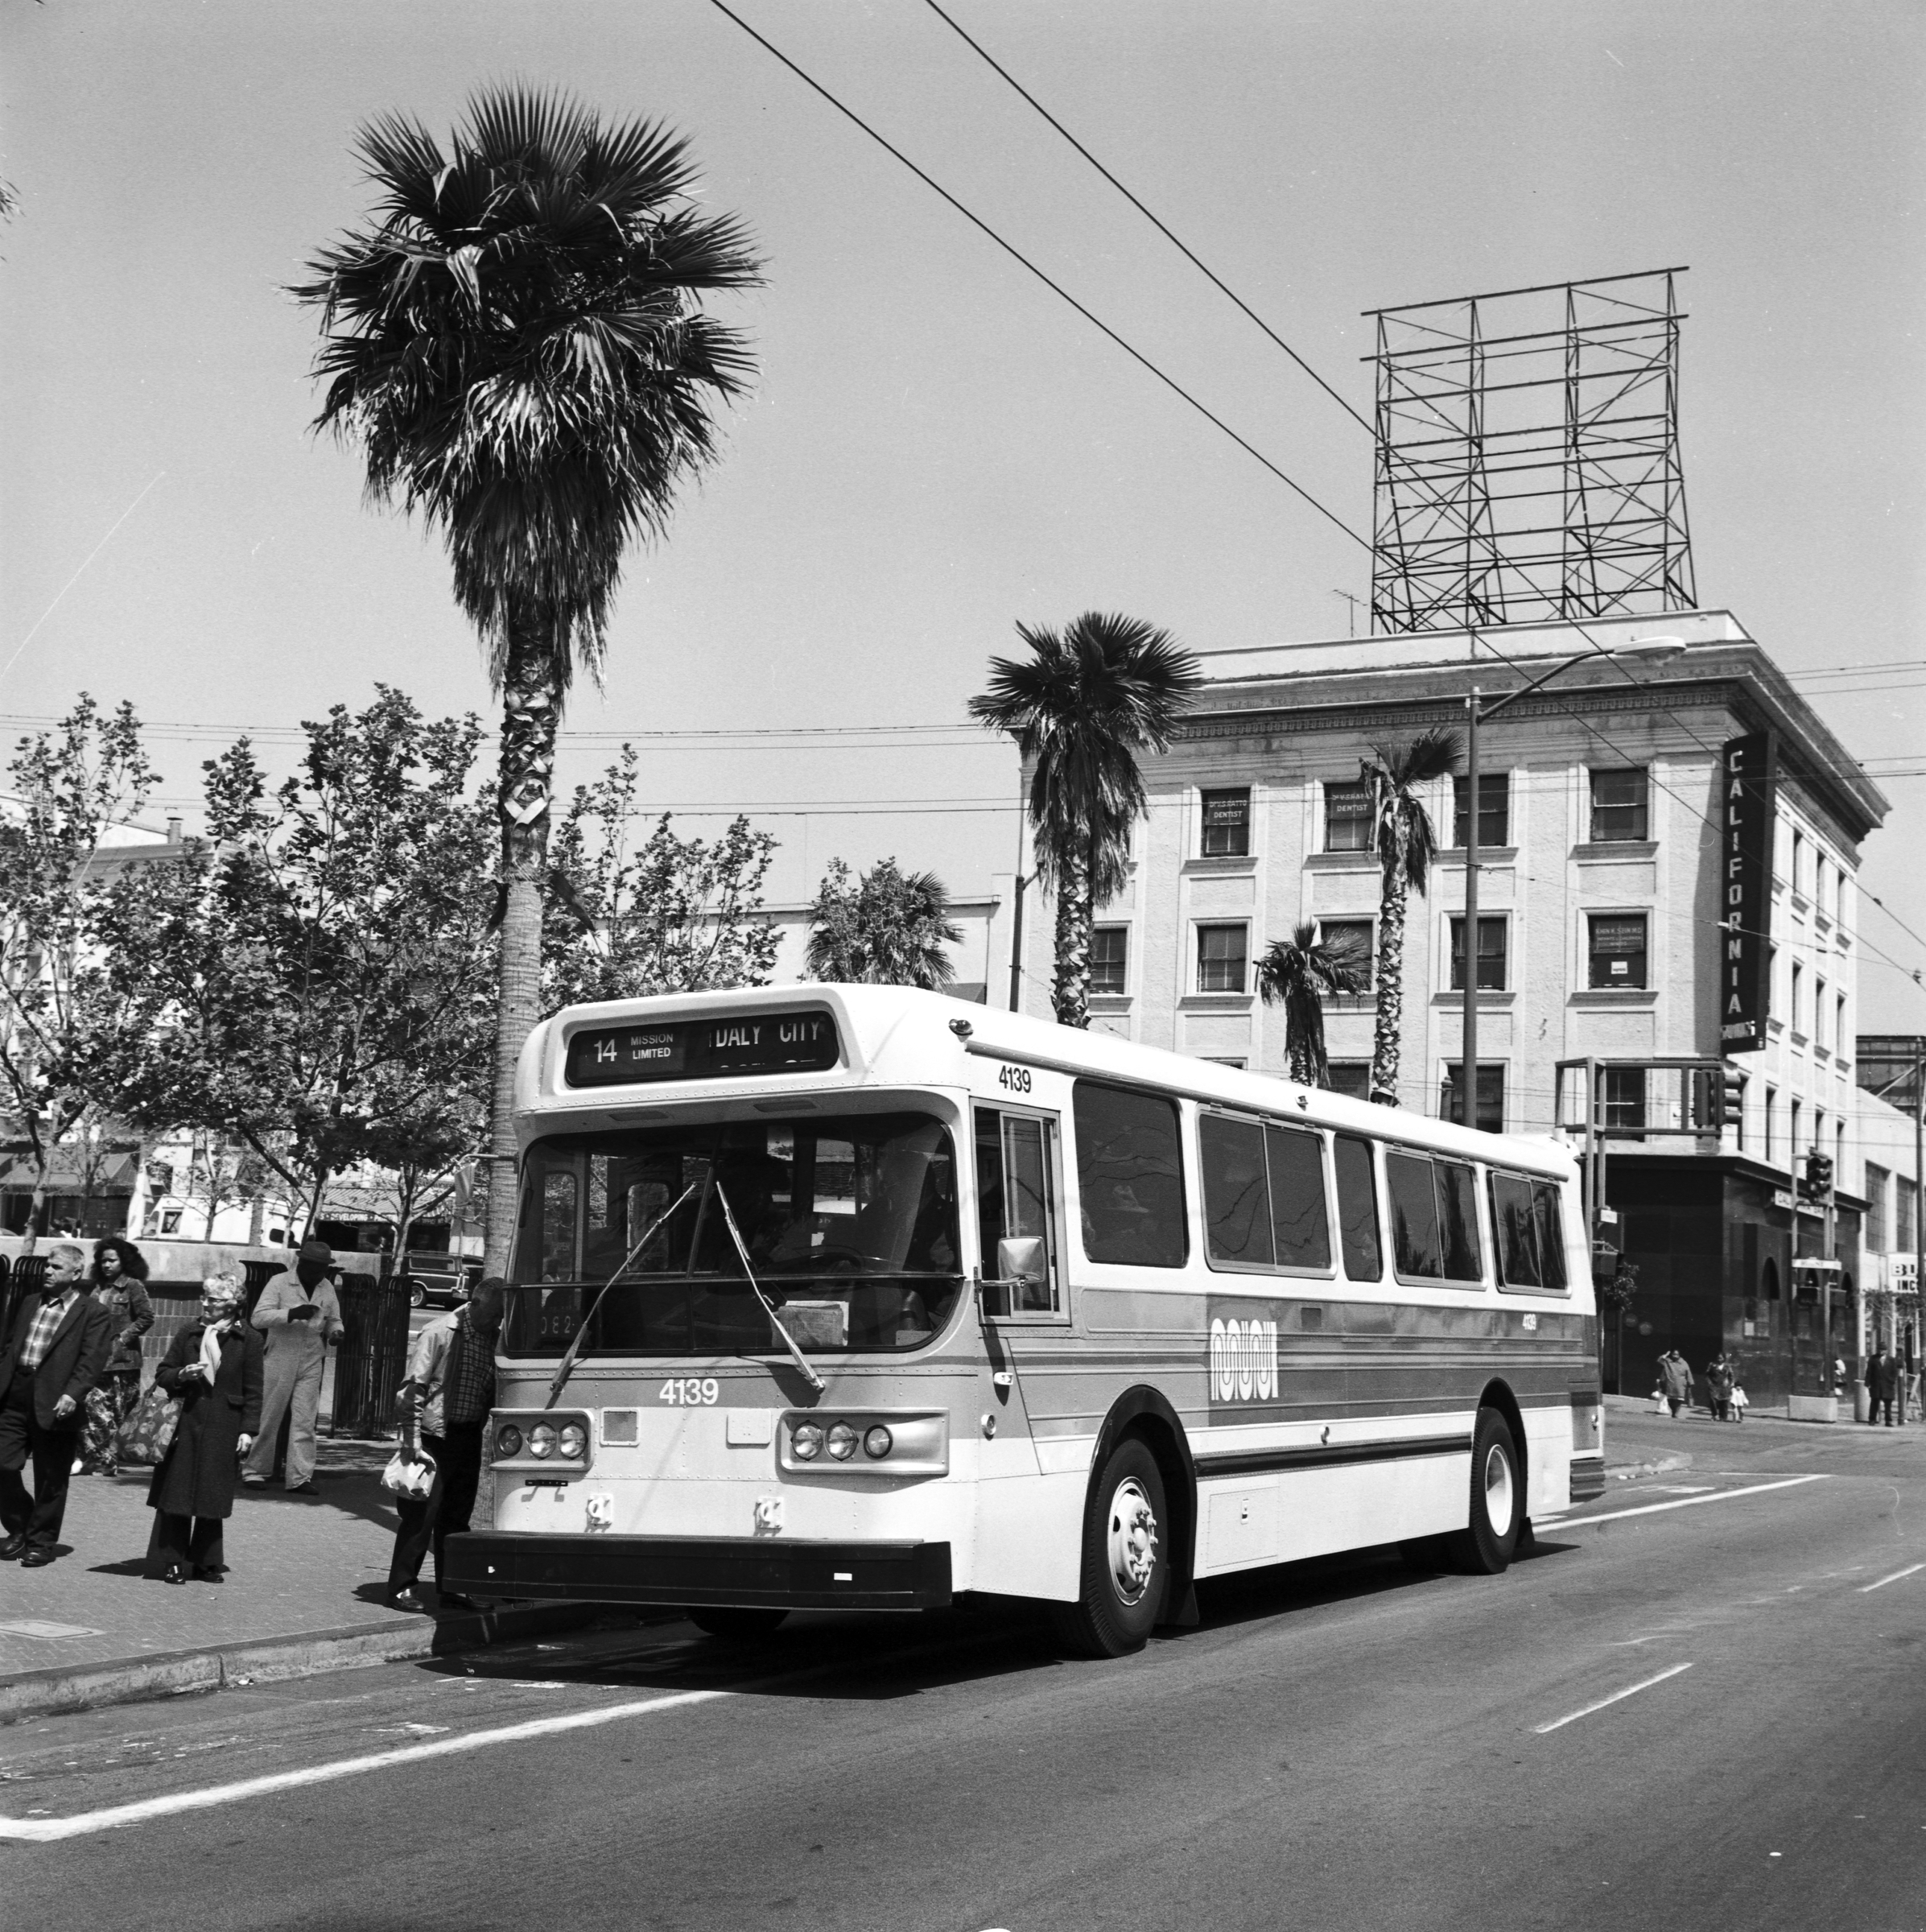 New AM General Motor Coach in Service at Mission and 16th Streets | May 6, 1975